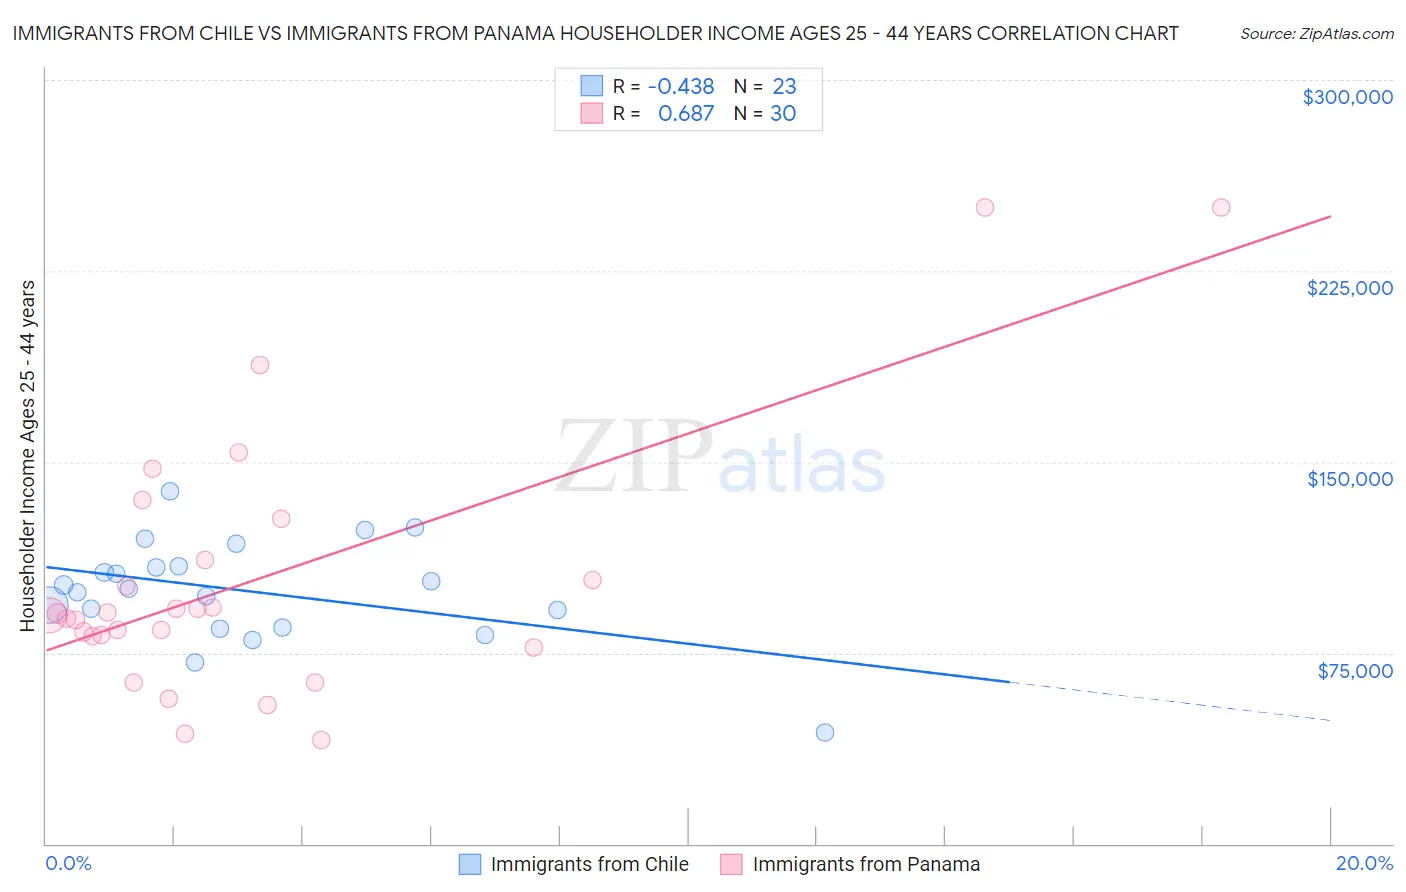 Immigrants from Chile vs Immigrants from Panama Householder Income Ages 25 - 44 years